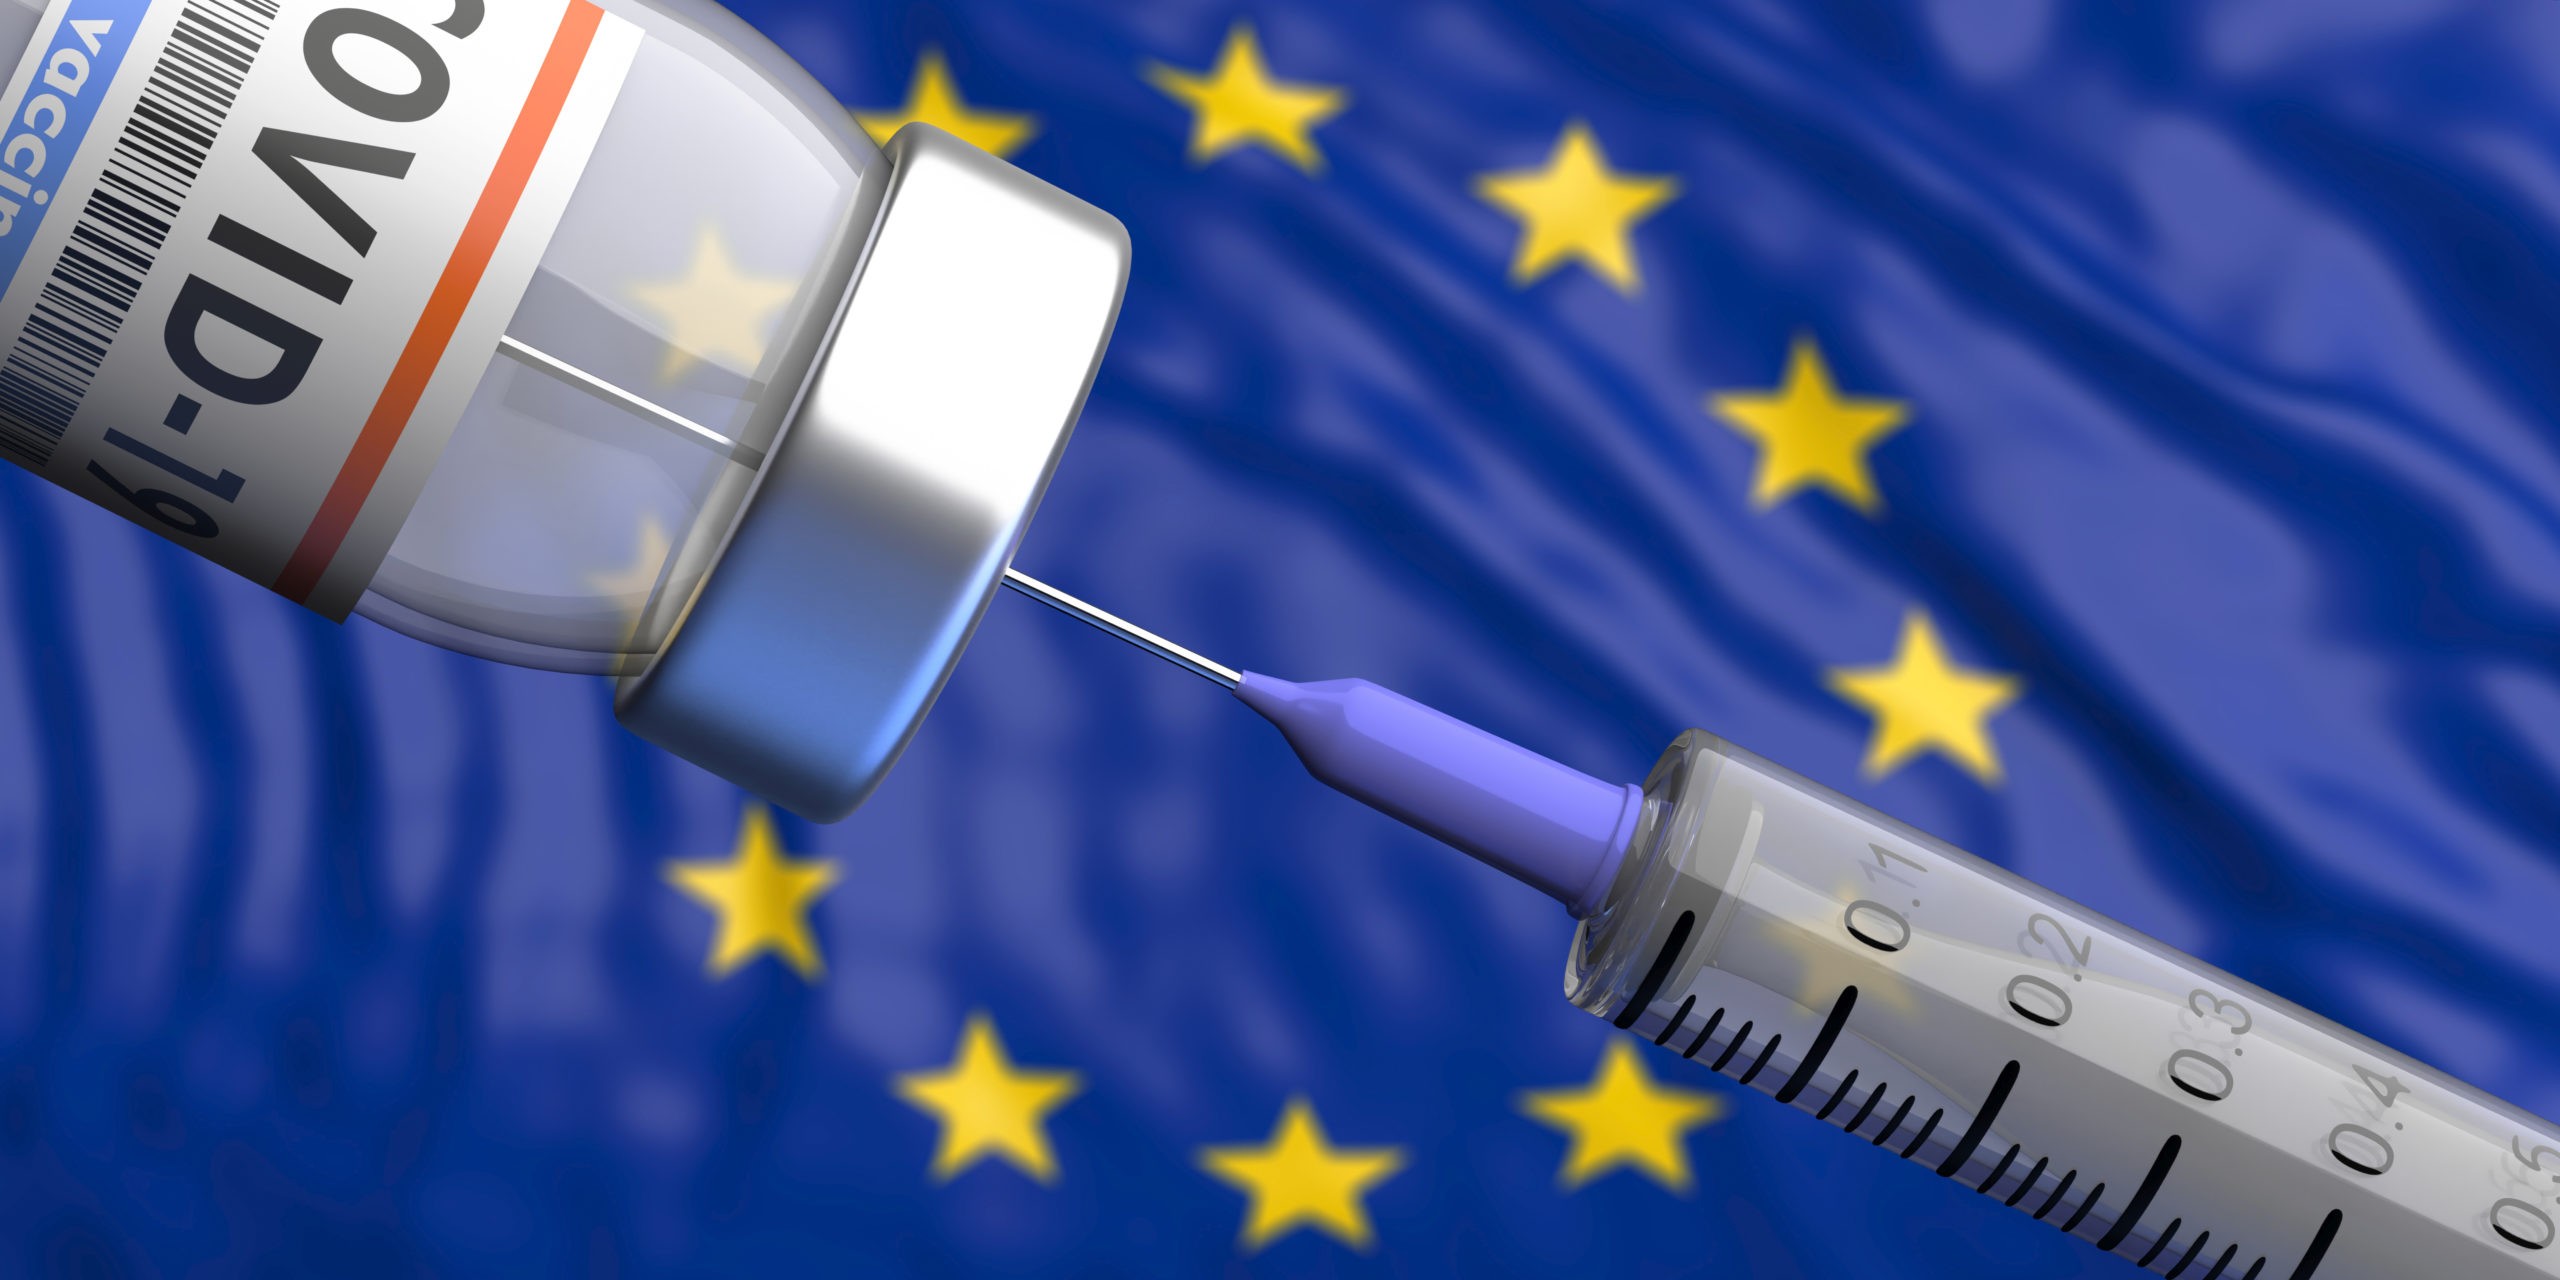 EU Has Vaccinated 70 Percent Of Population, Plans To Share Vaccines With Other Countries